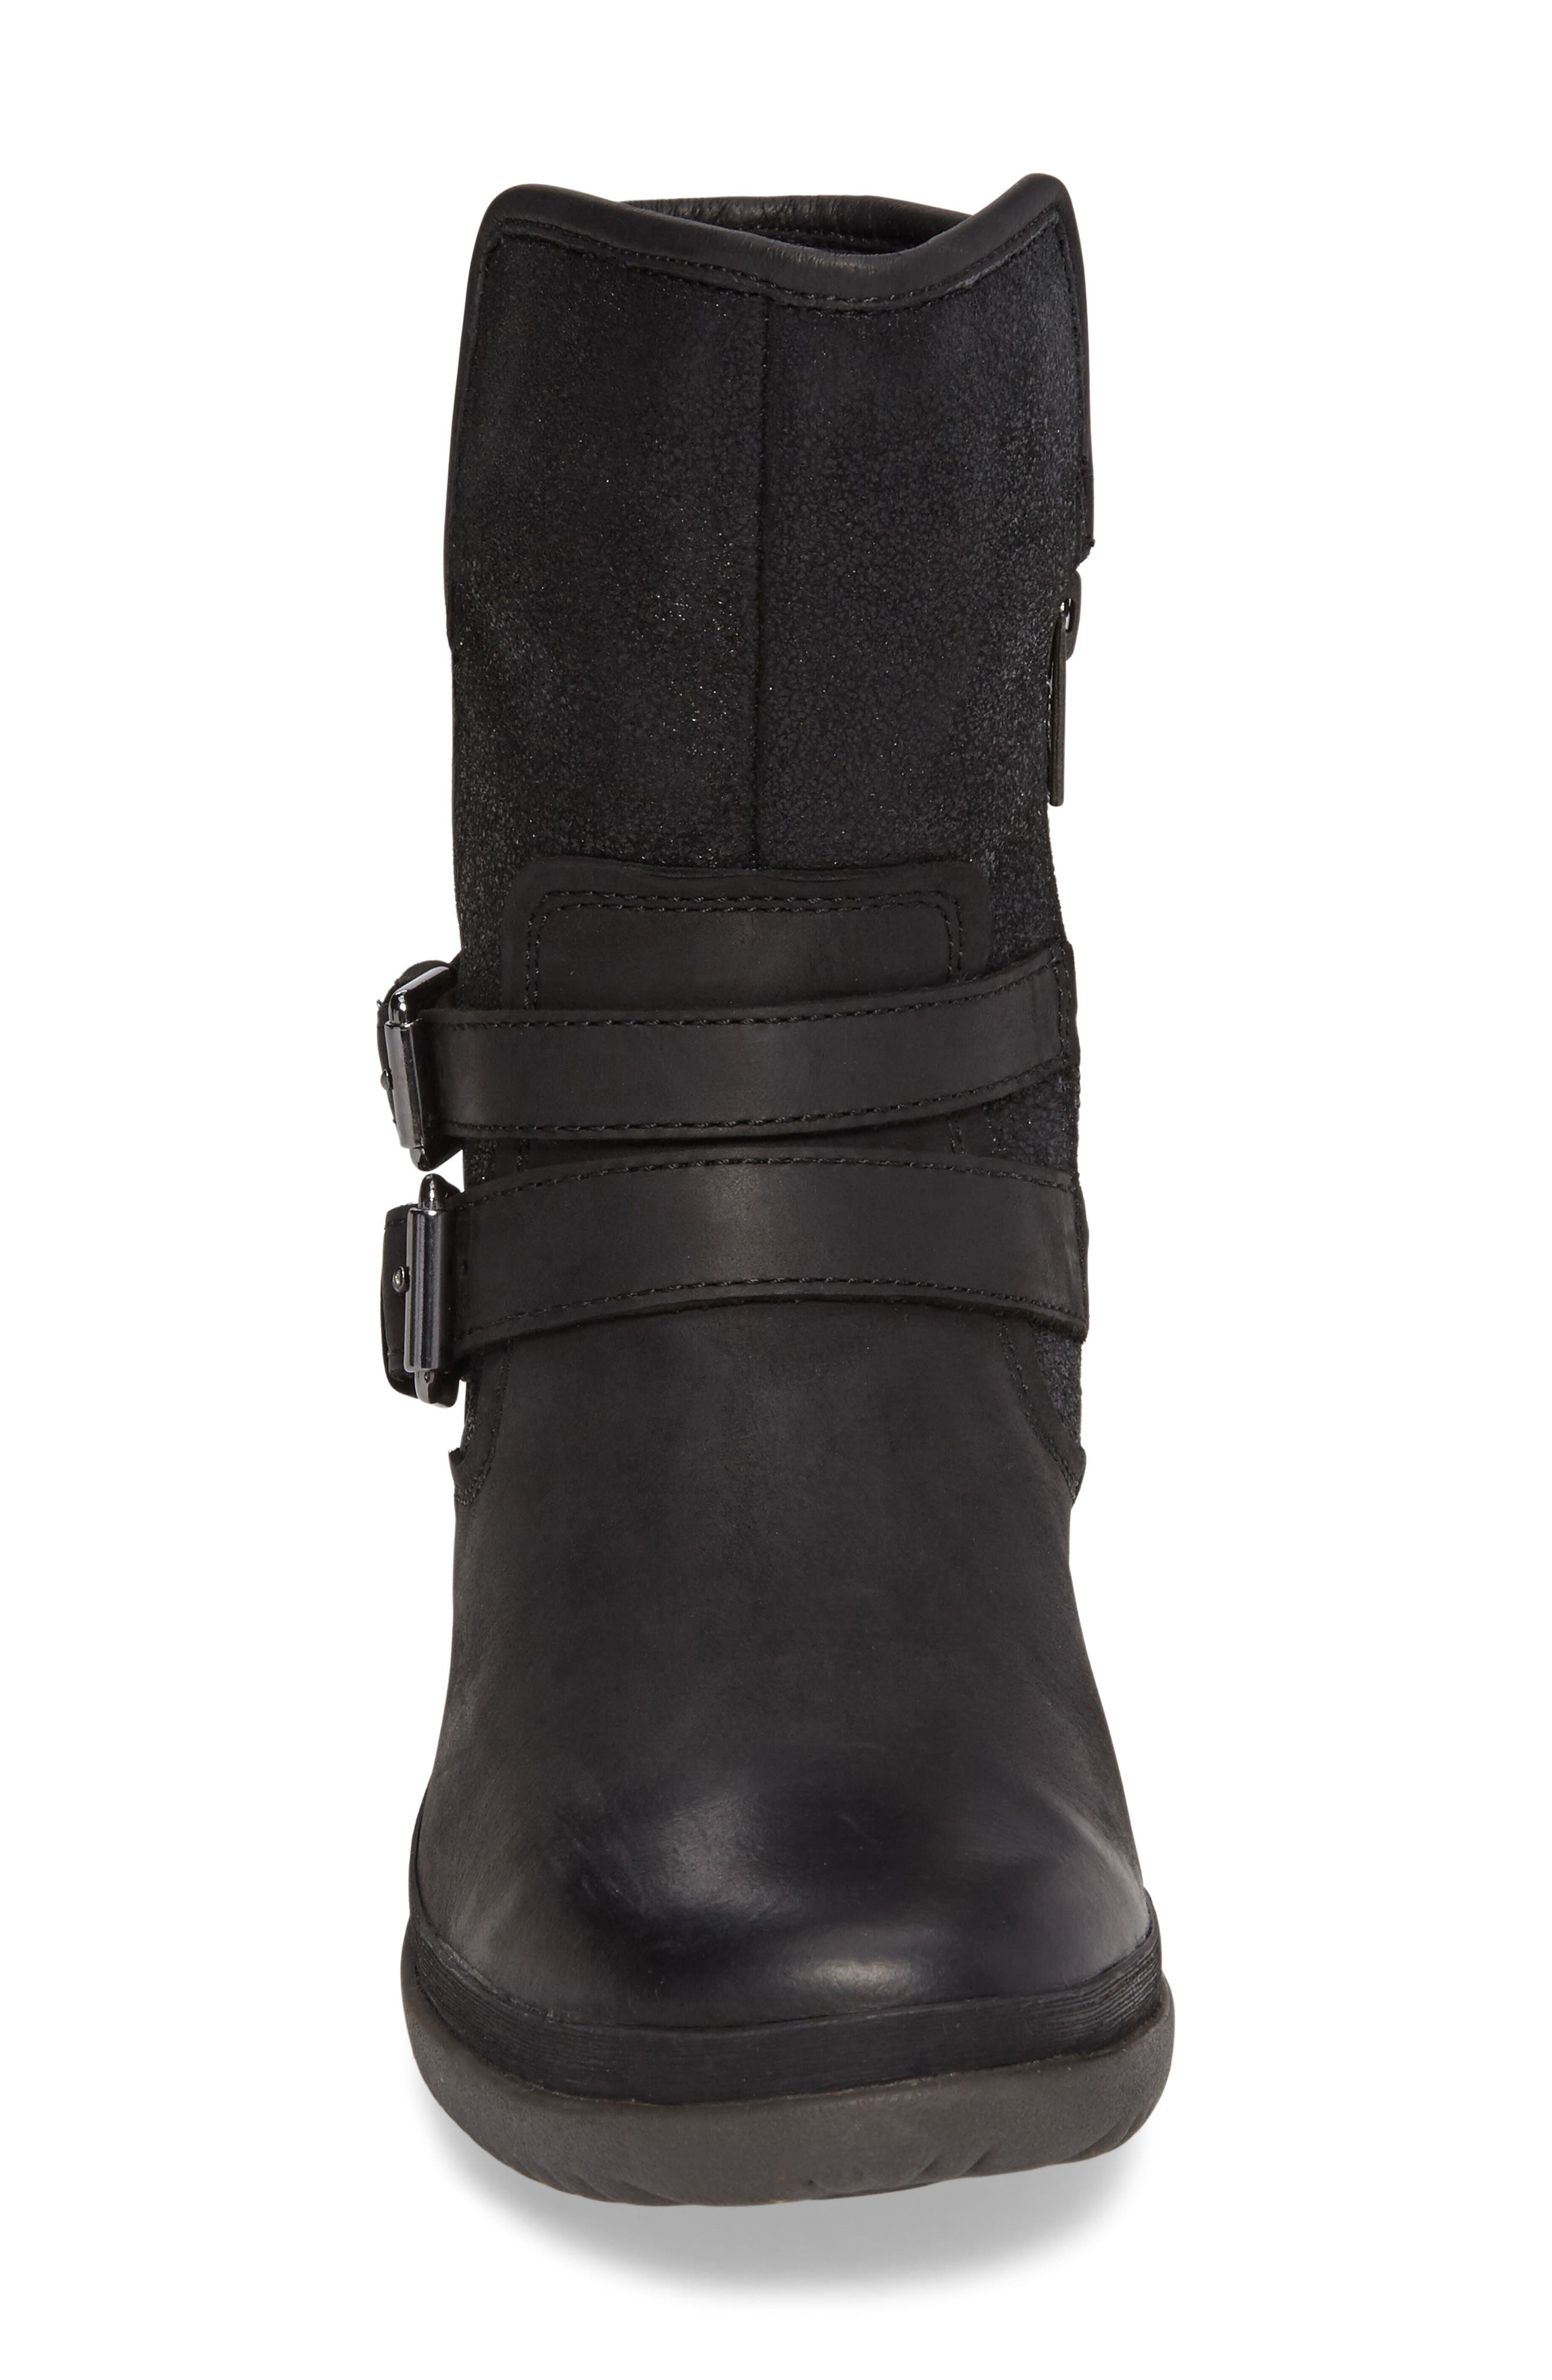 ugg women's simmens leather boot